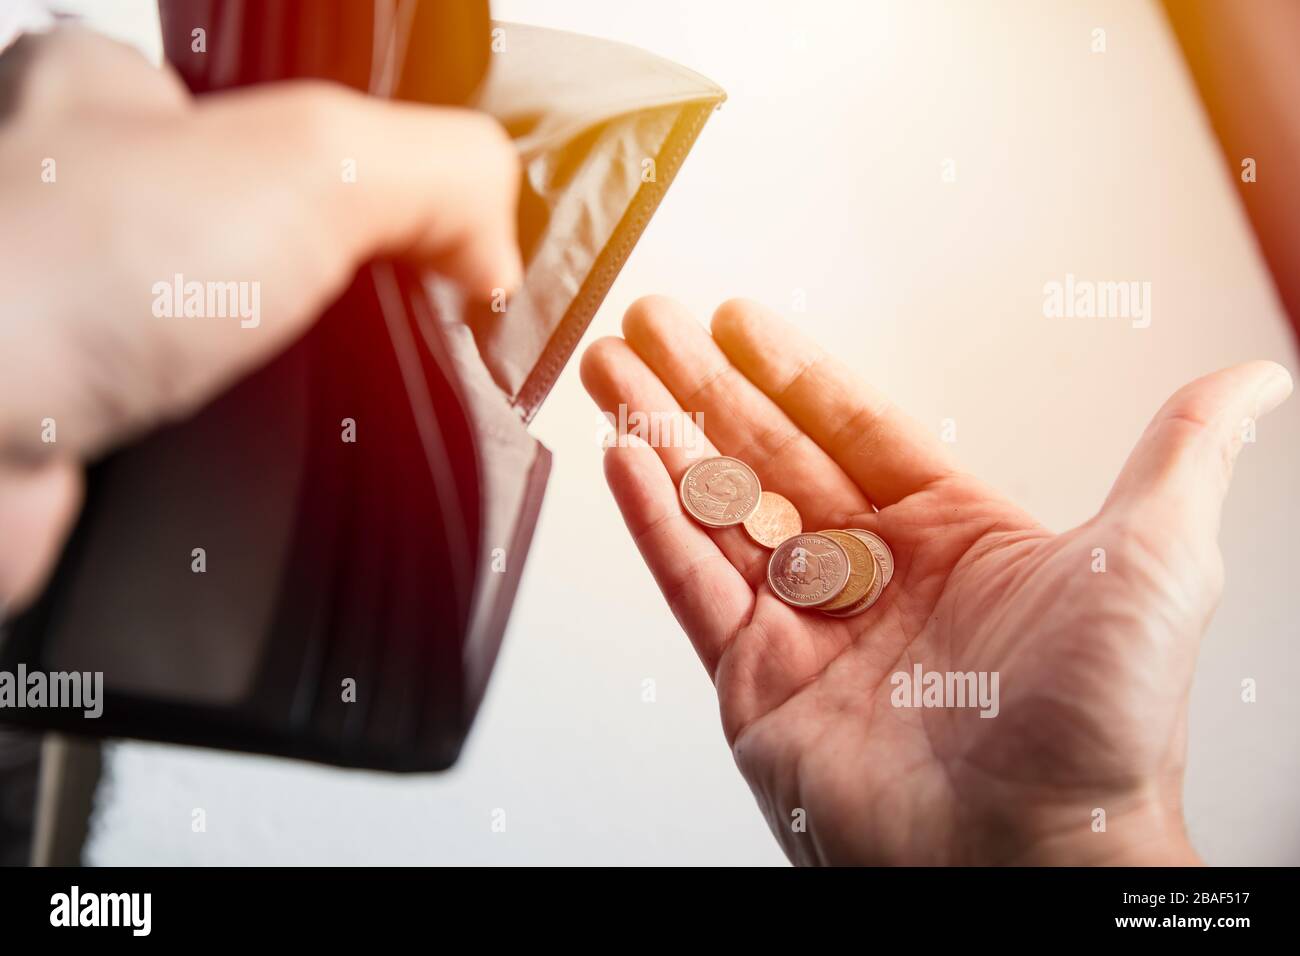 People are facing economic downturn. No money in the wallet only coins left as a poor broke man. Stock Photo